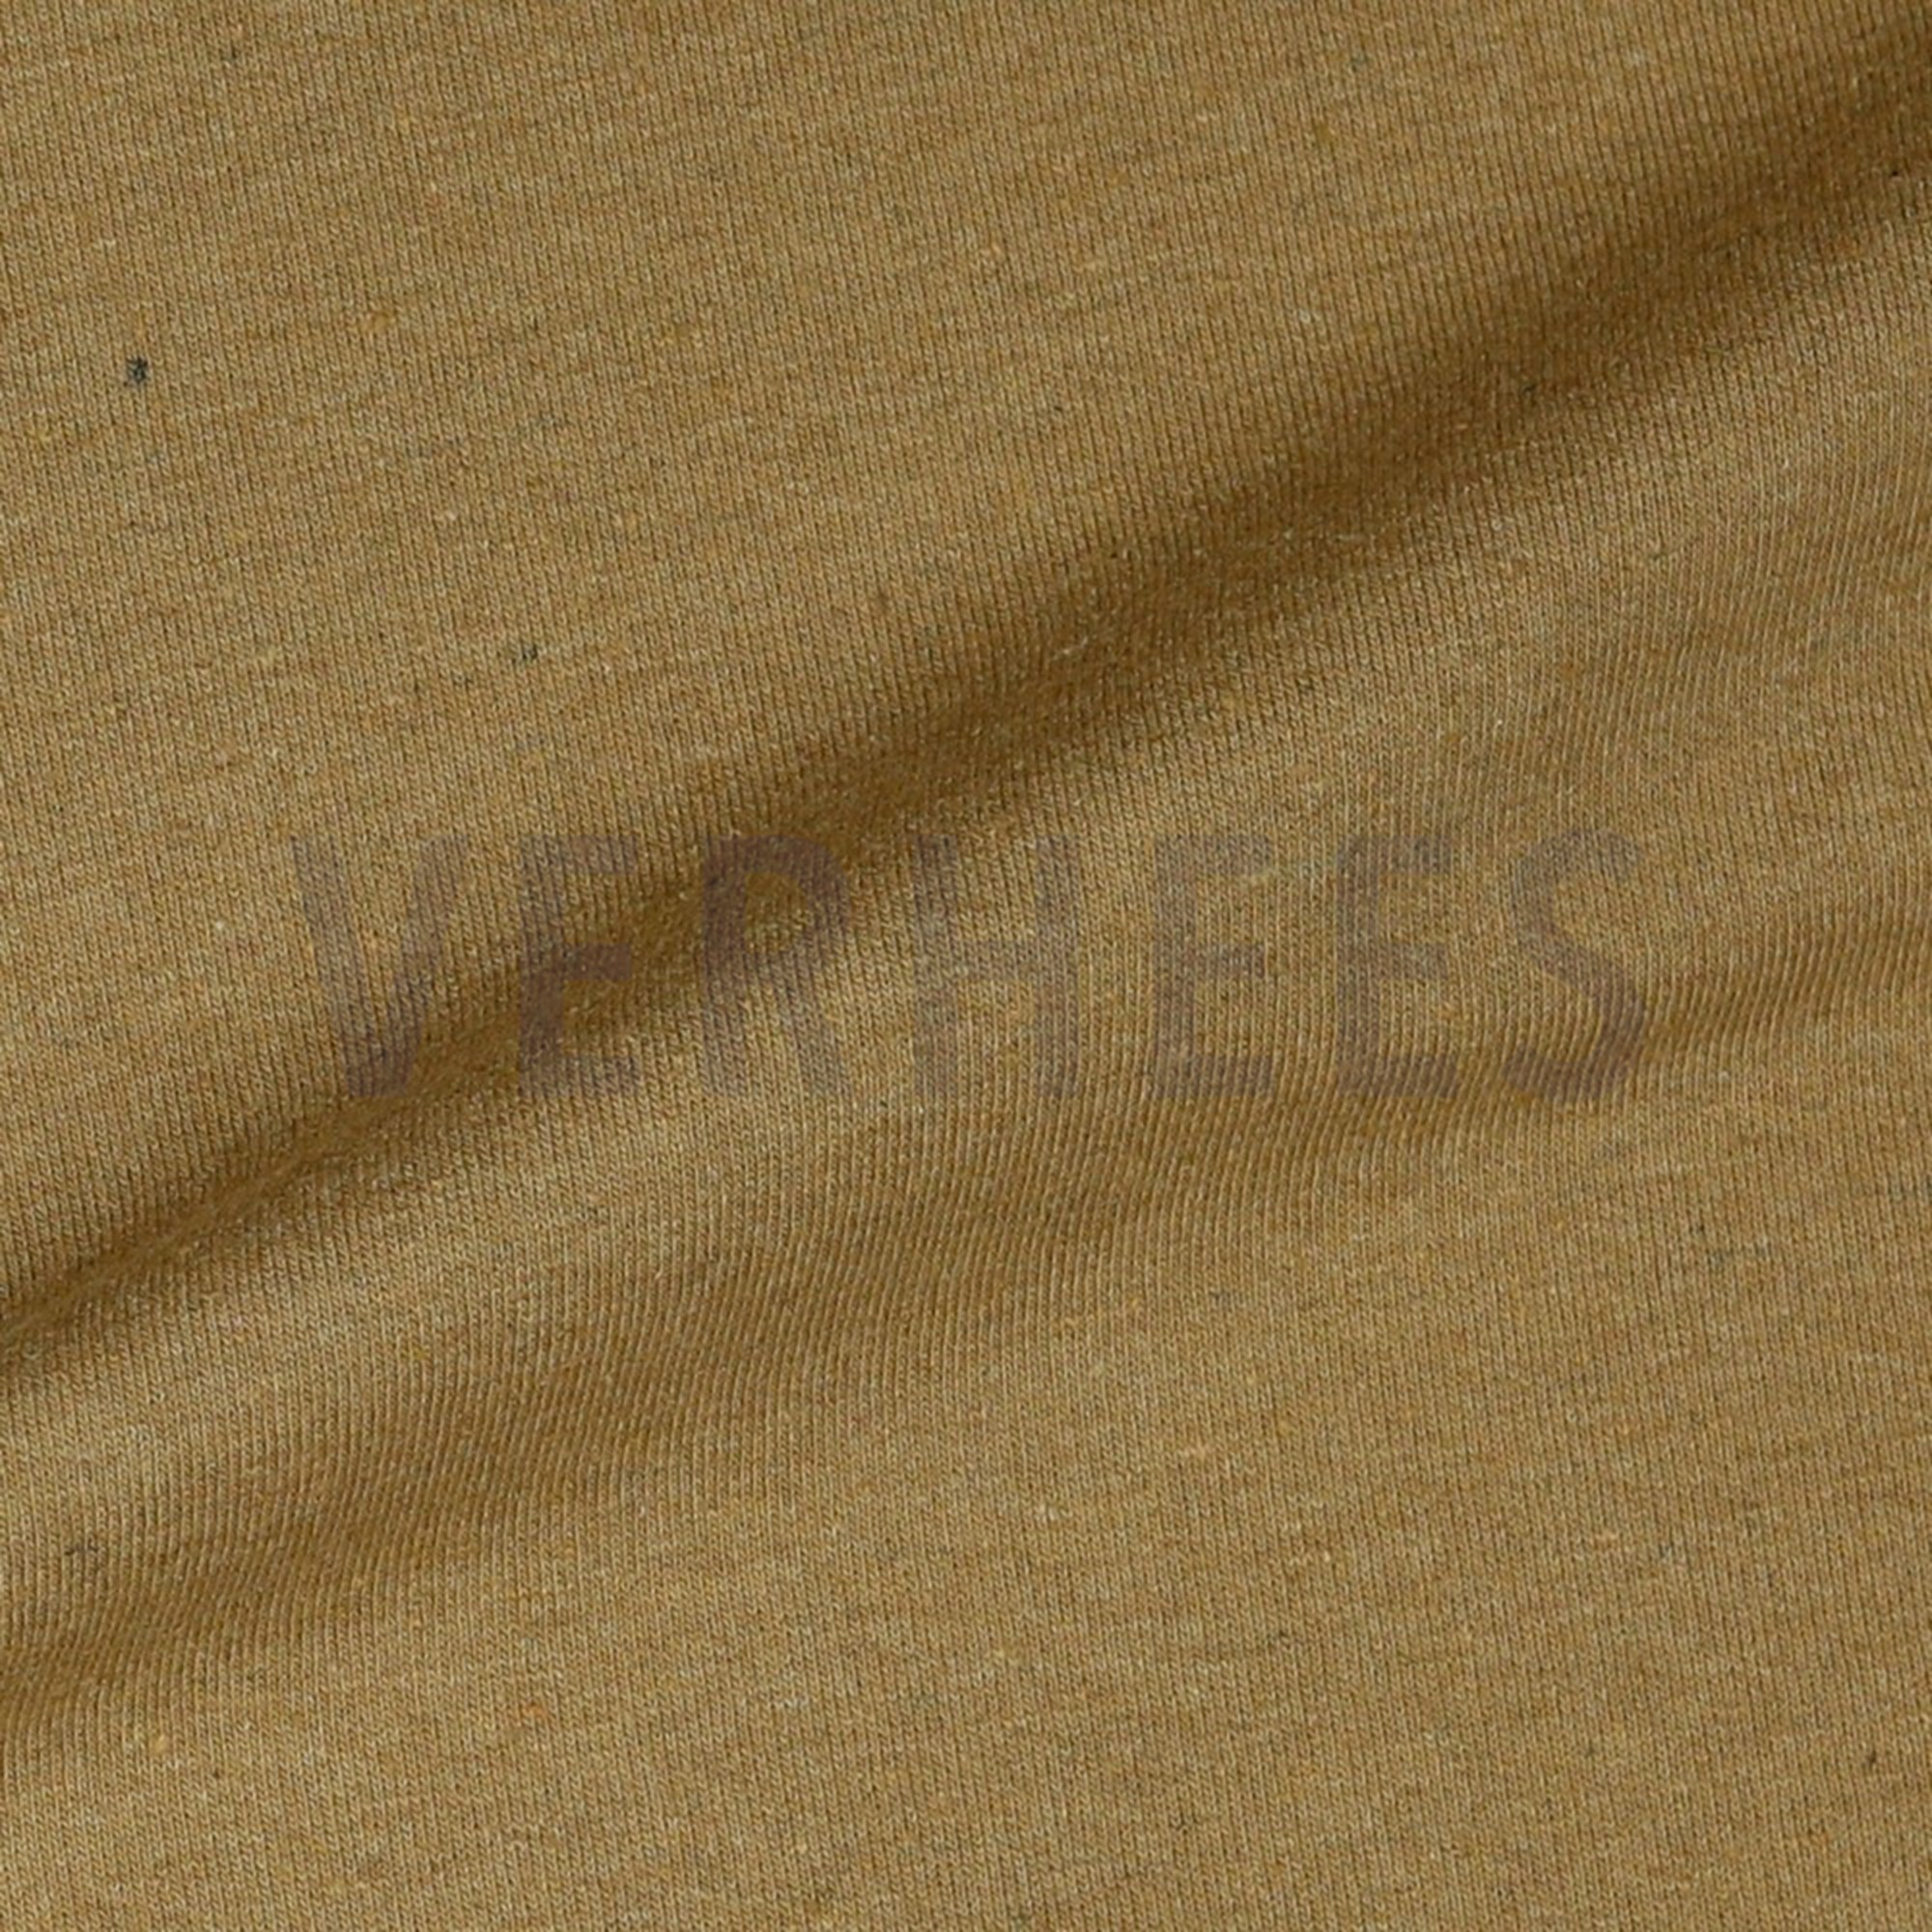 SWEAT RECYCLED LIGHT BROWN (high resolution) #3